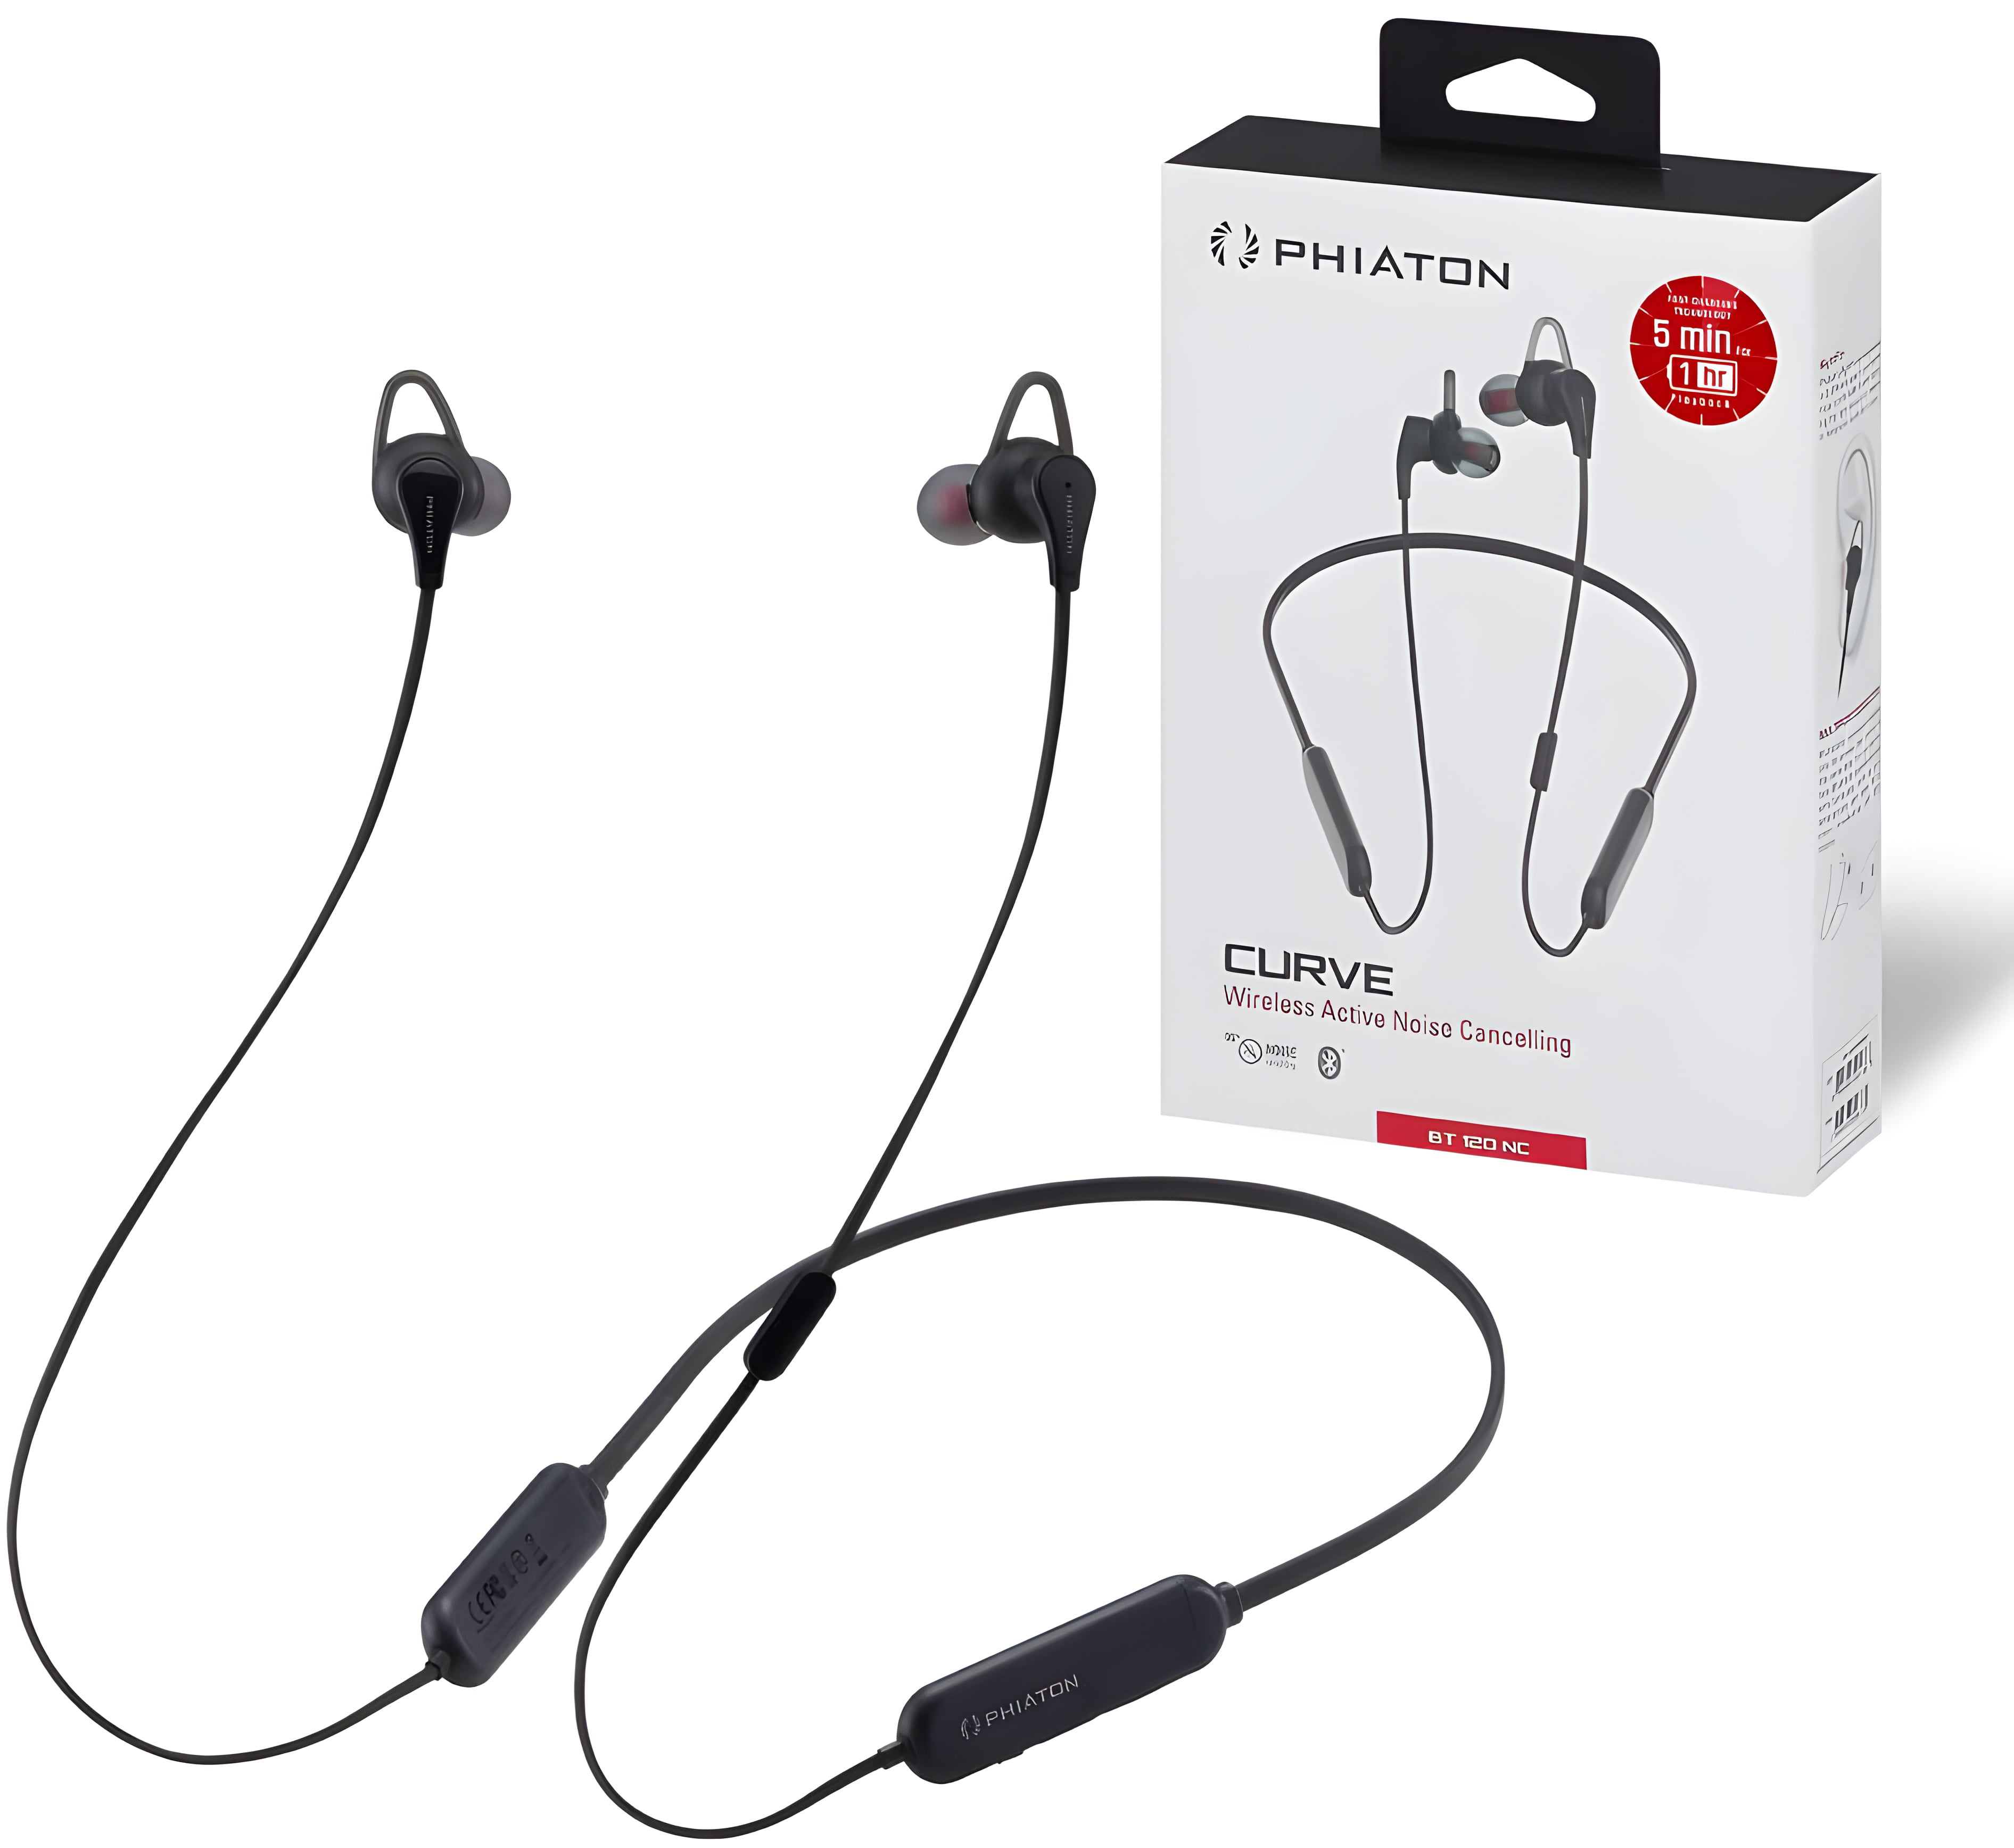 Water-resistant active noise-cancelling earbuds for sports